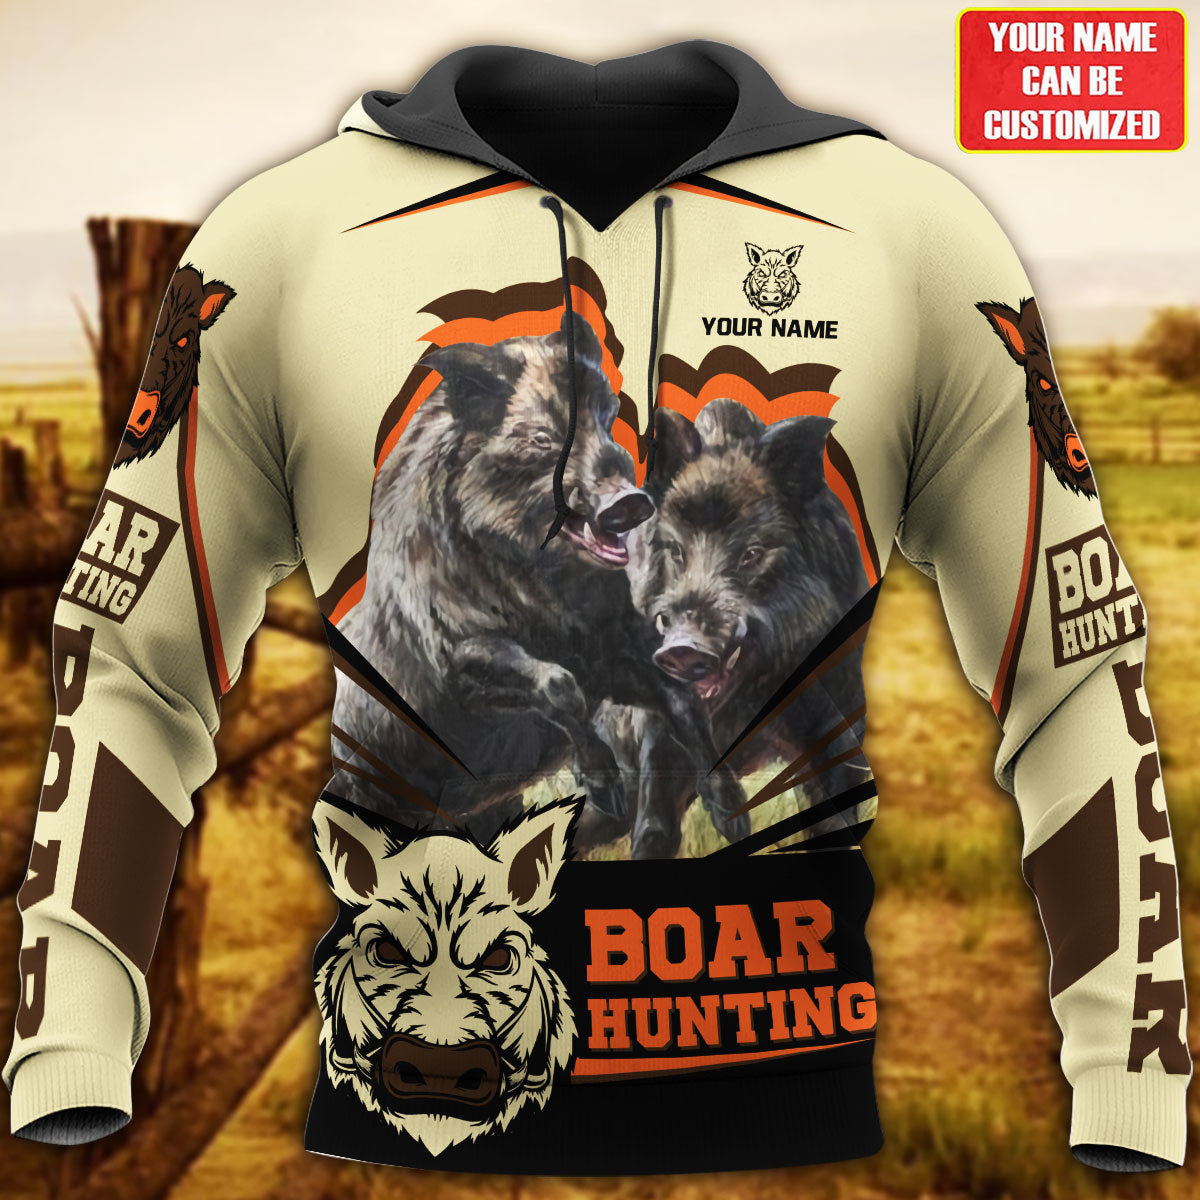 Personalized Name Boar Hunting All Over Printed Unisex Shirt/ Hunting Hoodie/ Boar Hunting Shirt